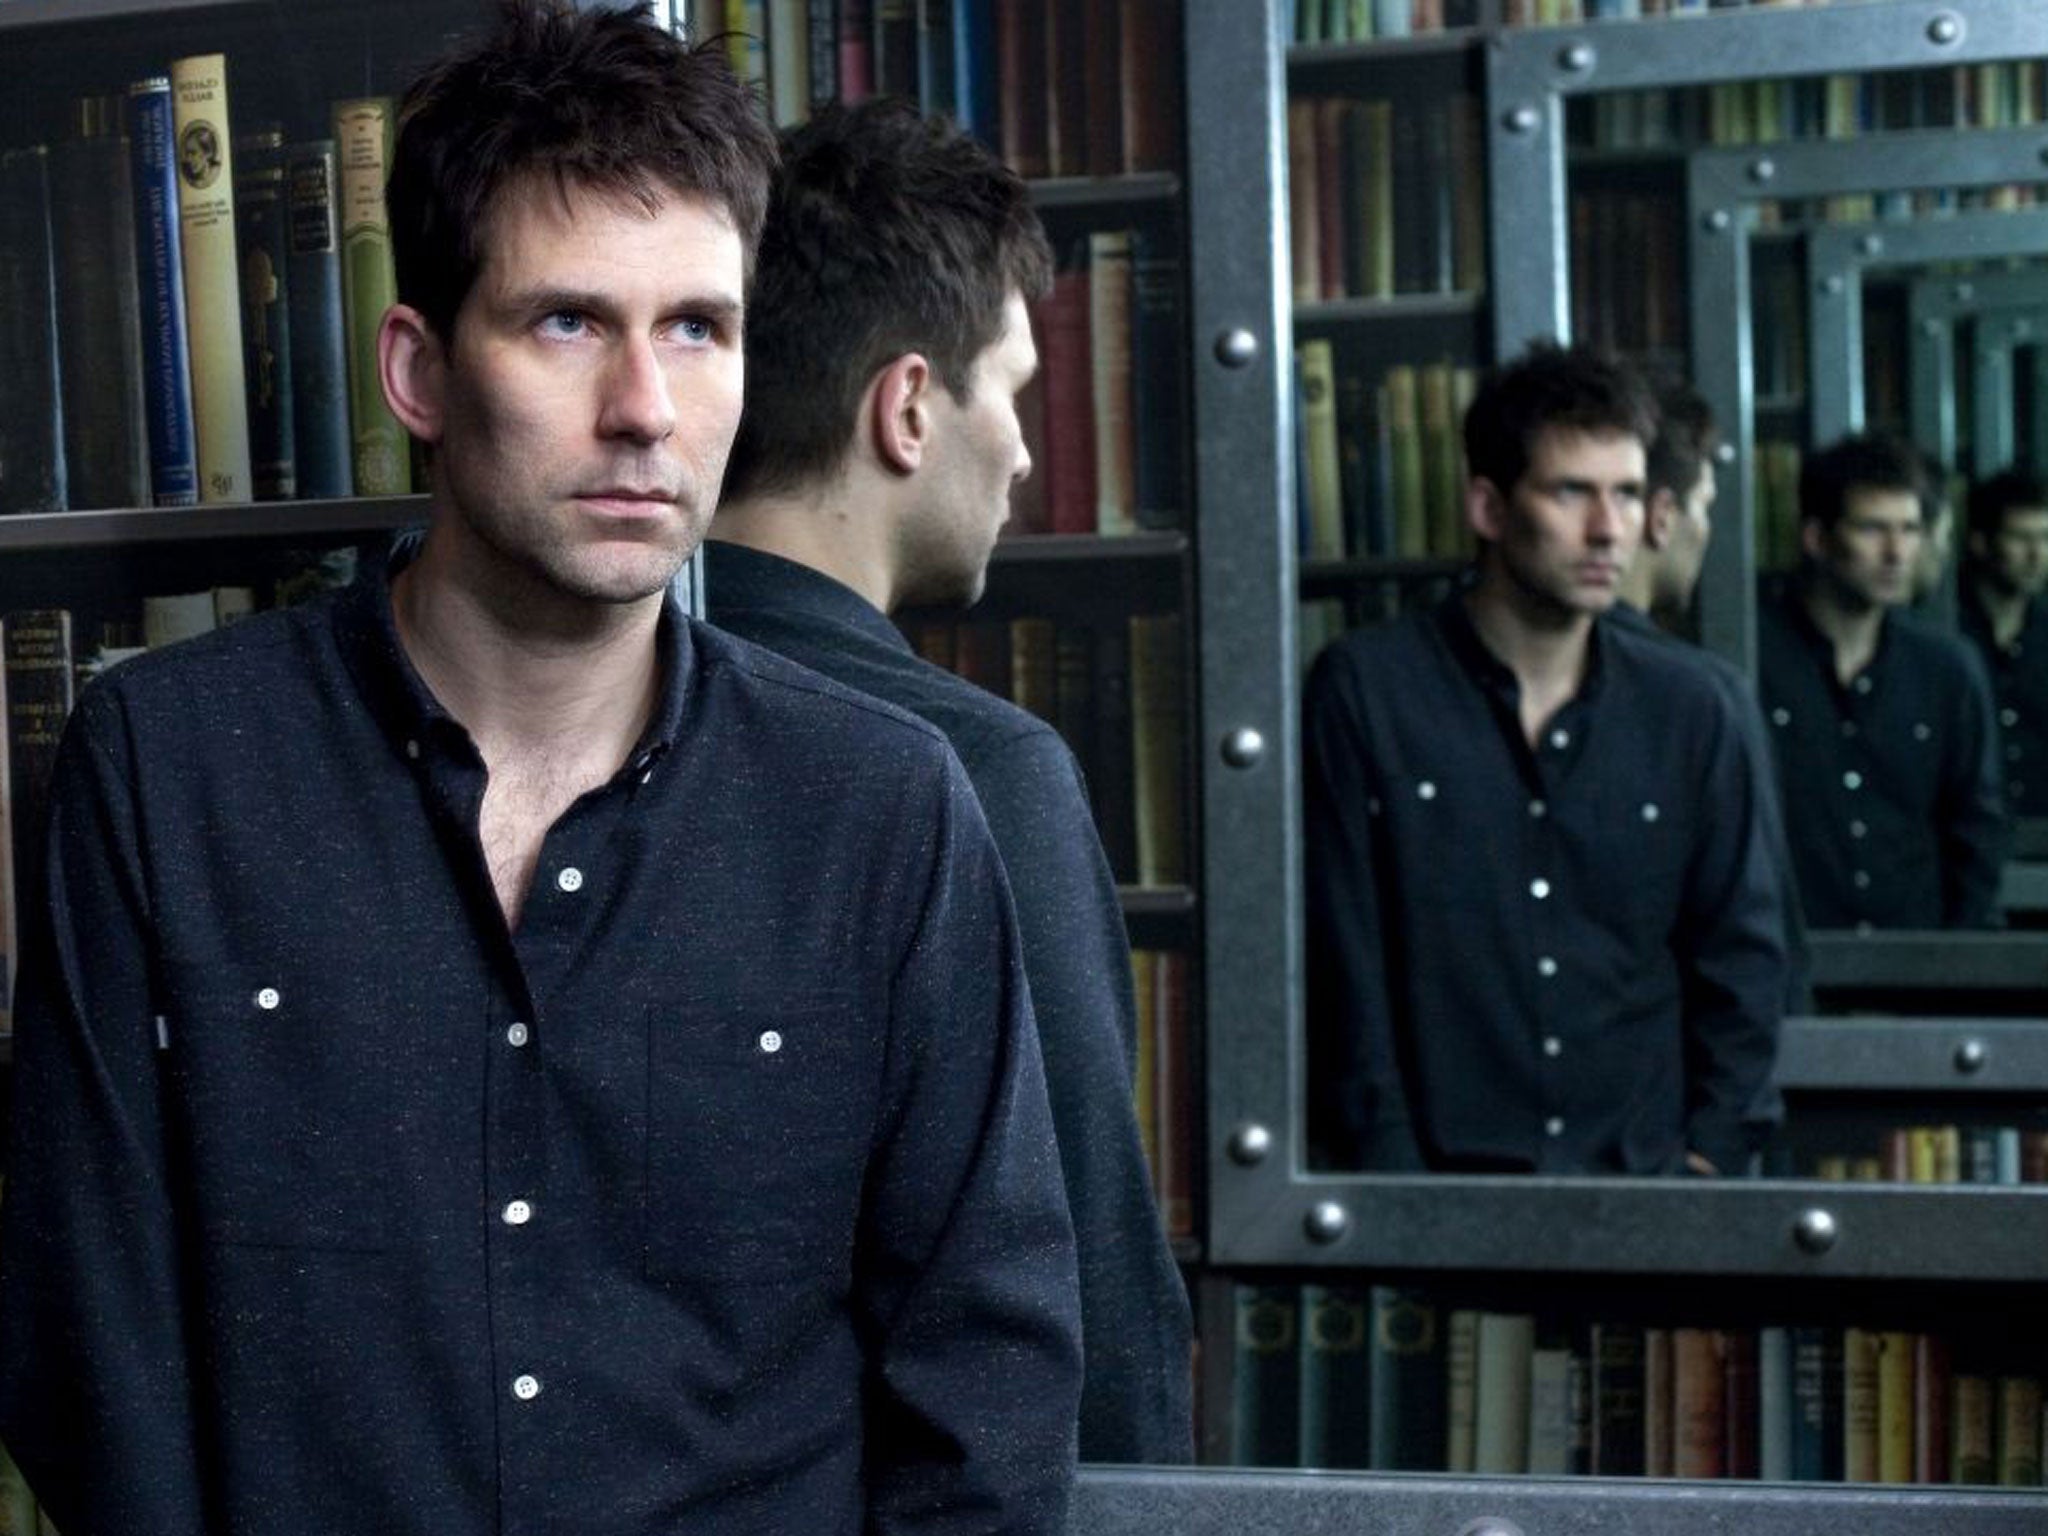 Jamie Lidell appears to have settled into a new, comfortable place